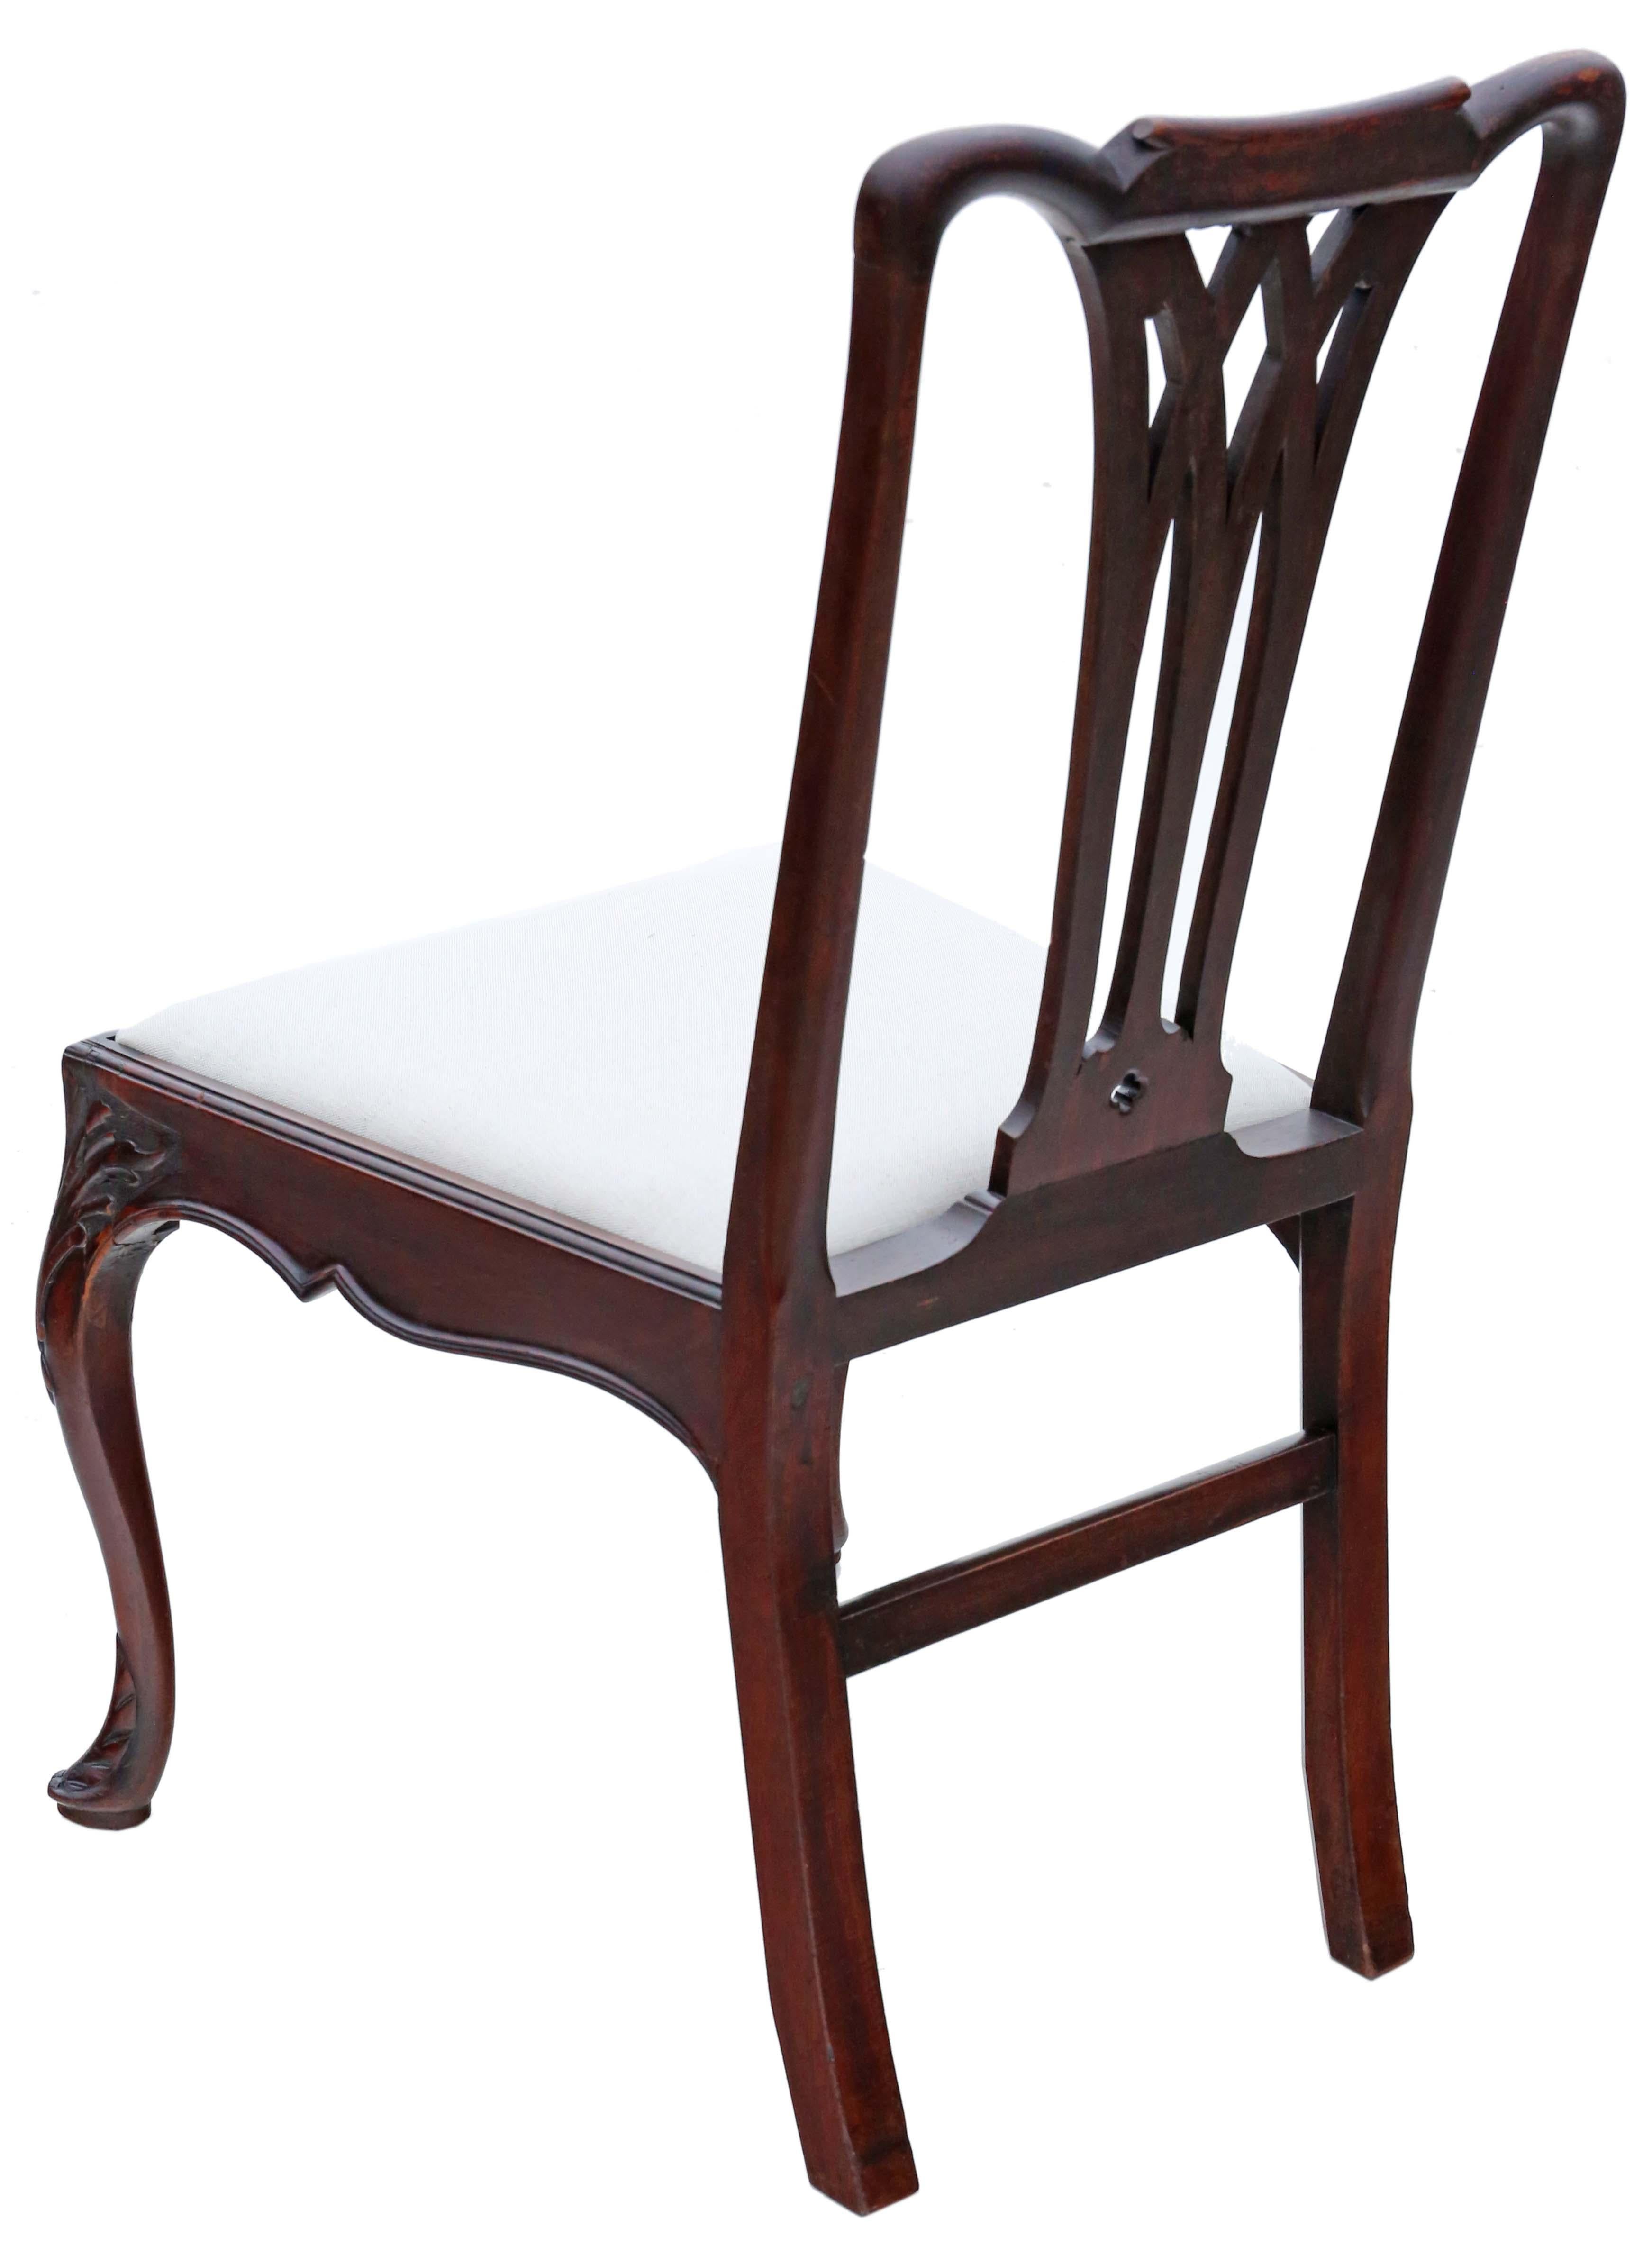 Antique 18th Century Georgian Mahogany Dining Chairs: Set of 10, High Quality For Sale 1